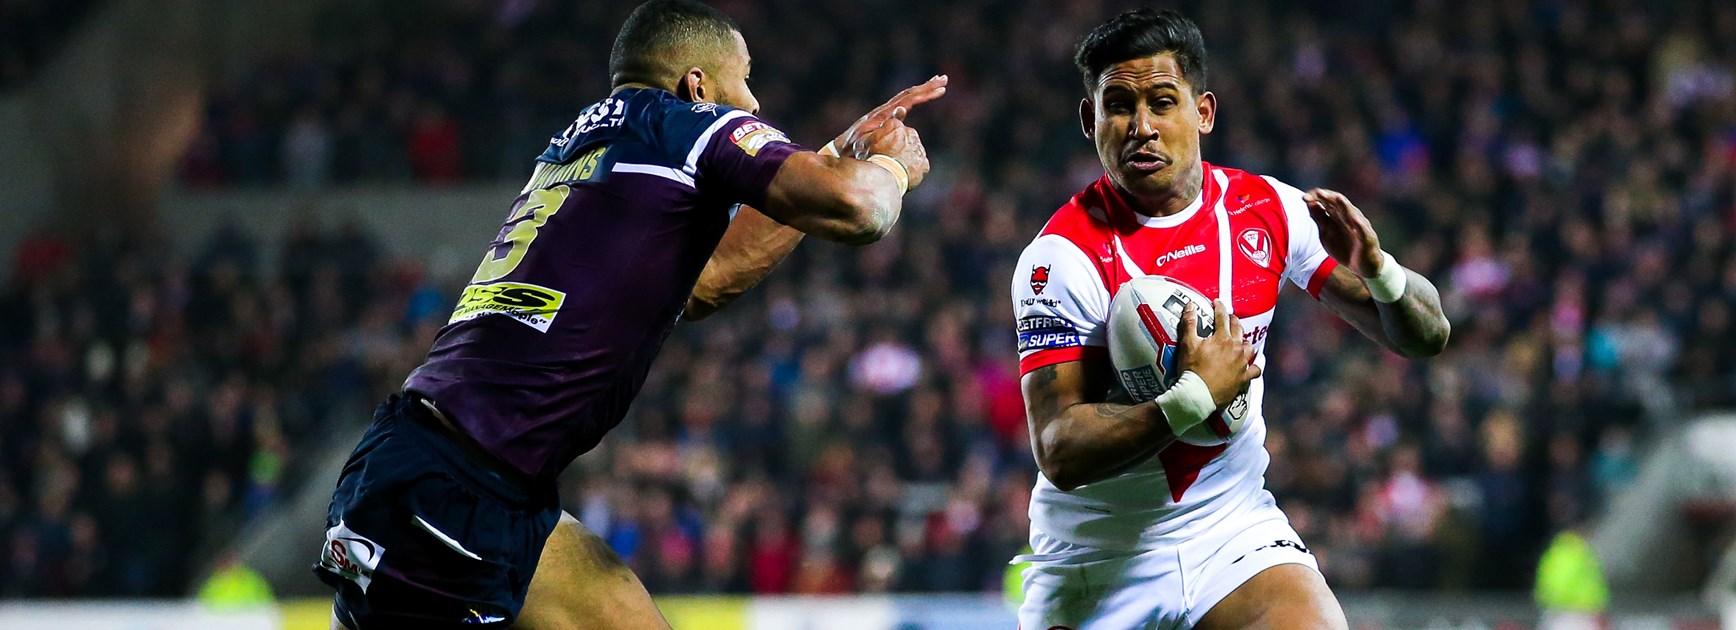 Ben Barba playing for St Helens.